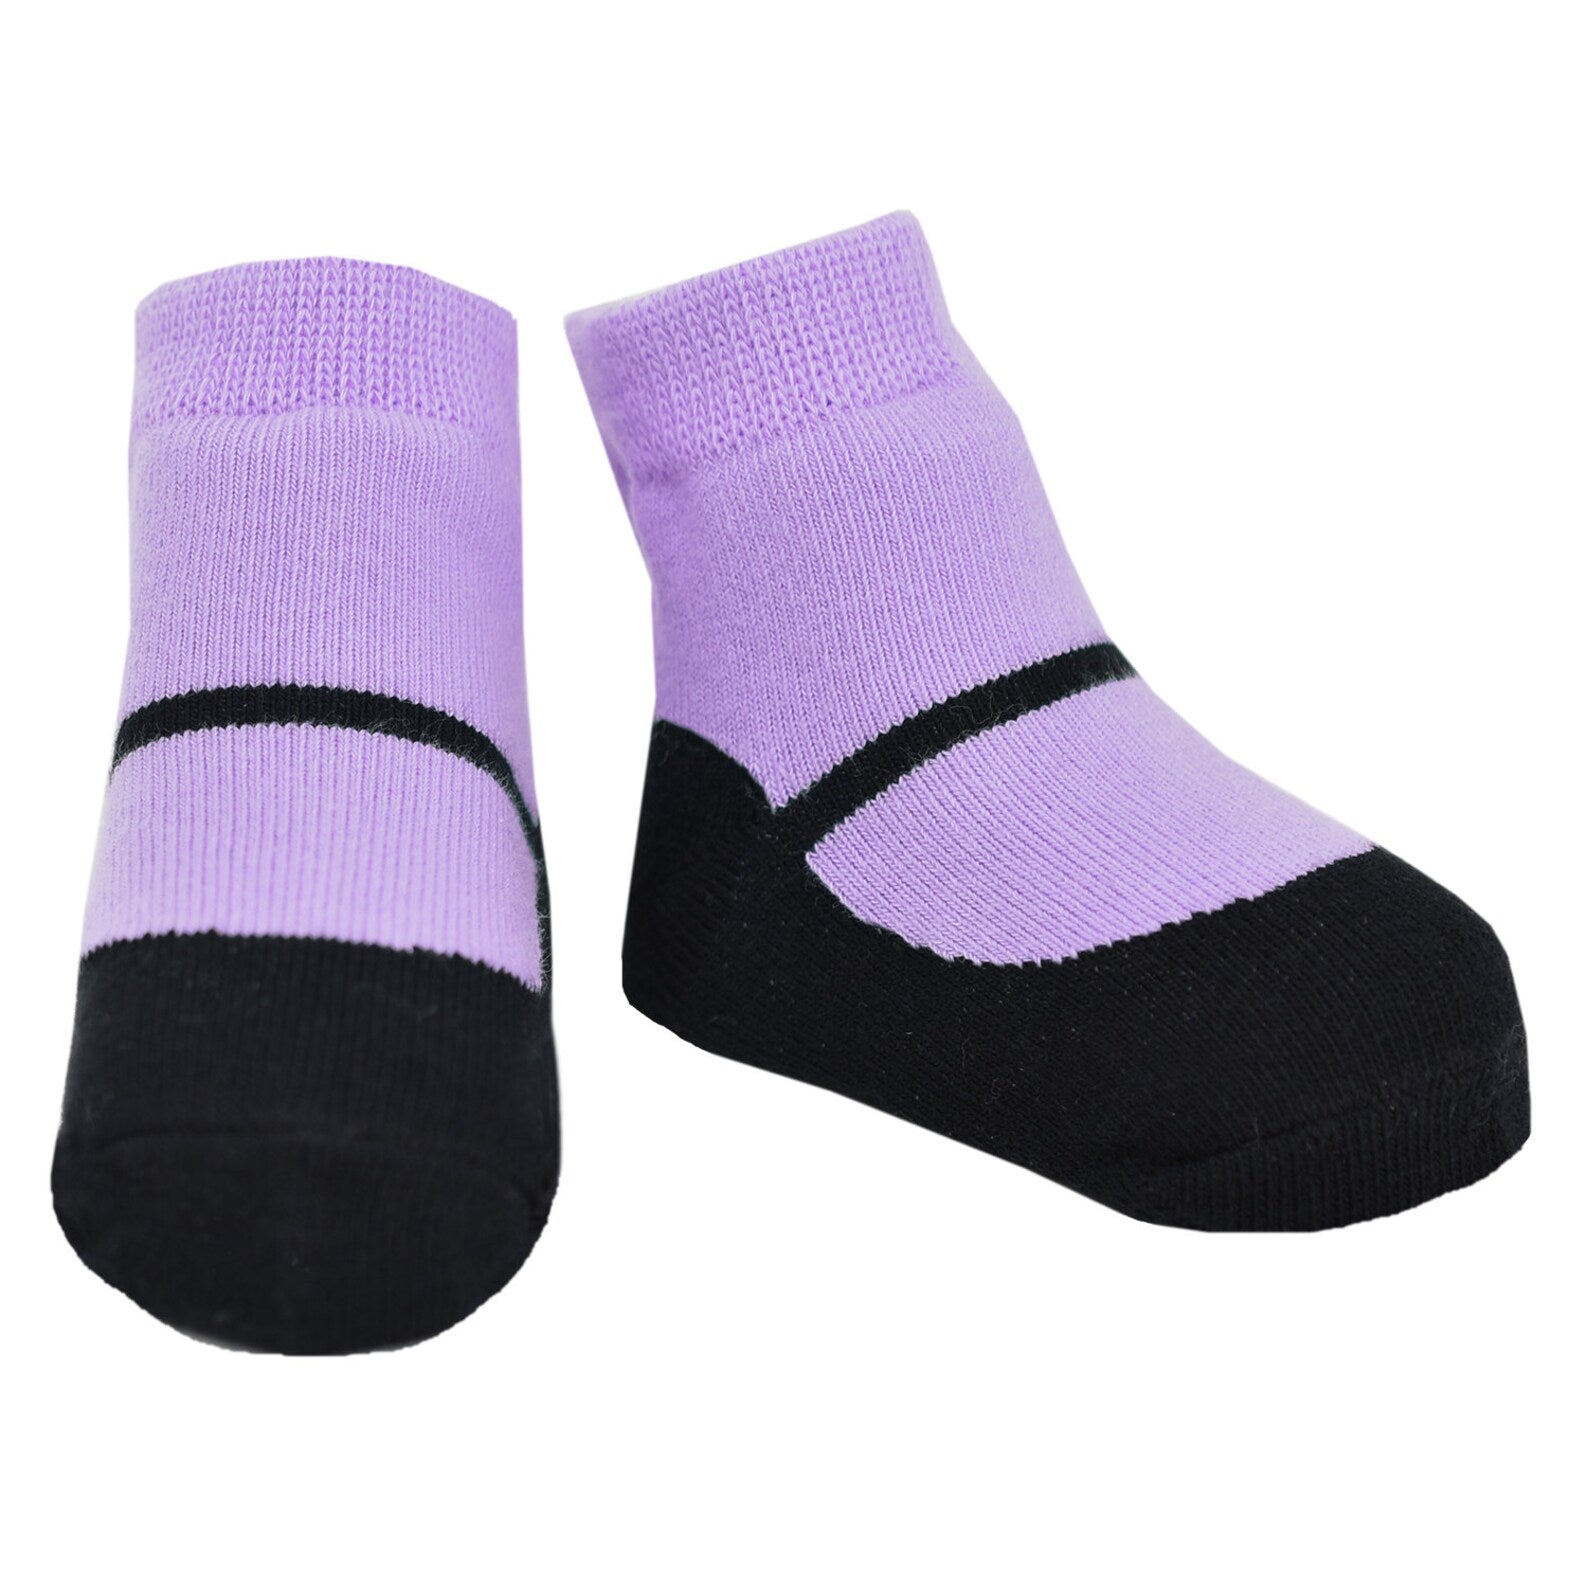 Black Mary Jane shoe look socks with lavender top